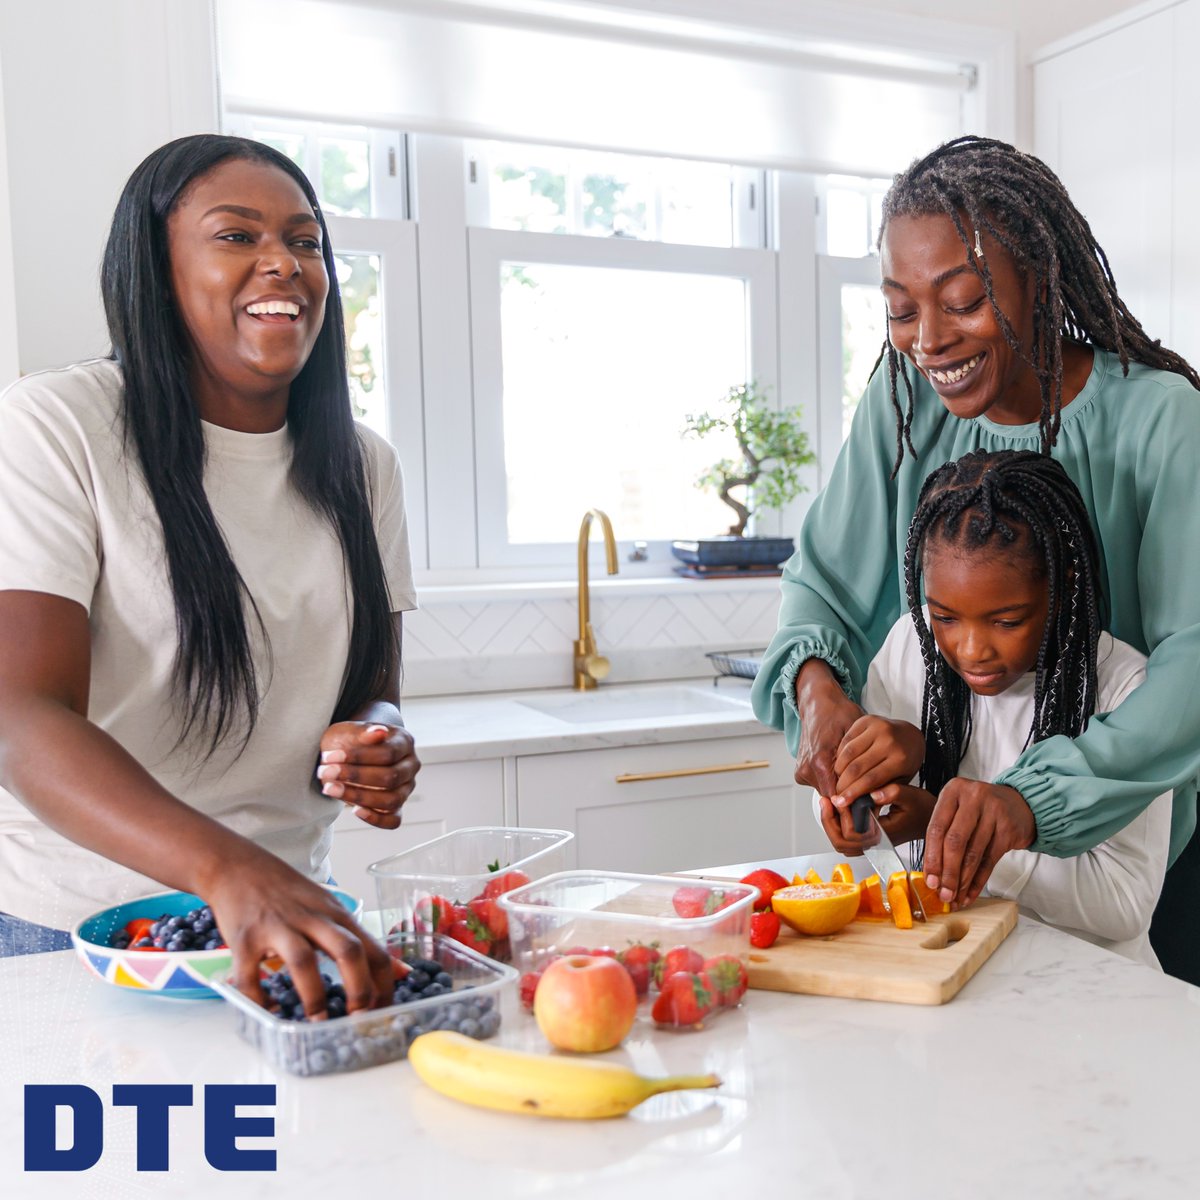 dte-energy-on-twitter-if-you-need-financial-assistance-to-pay-your